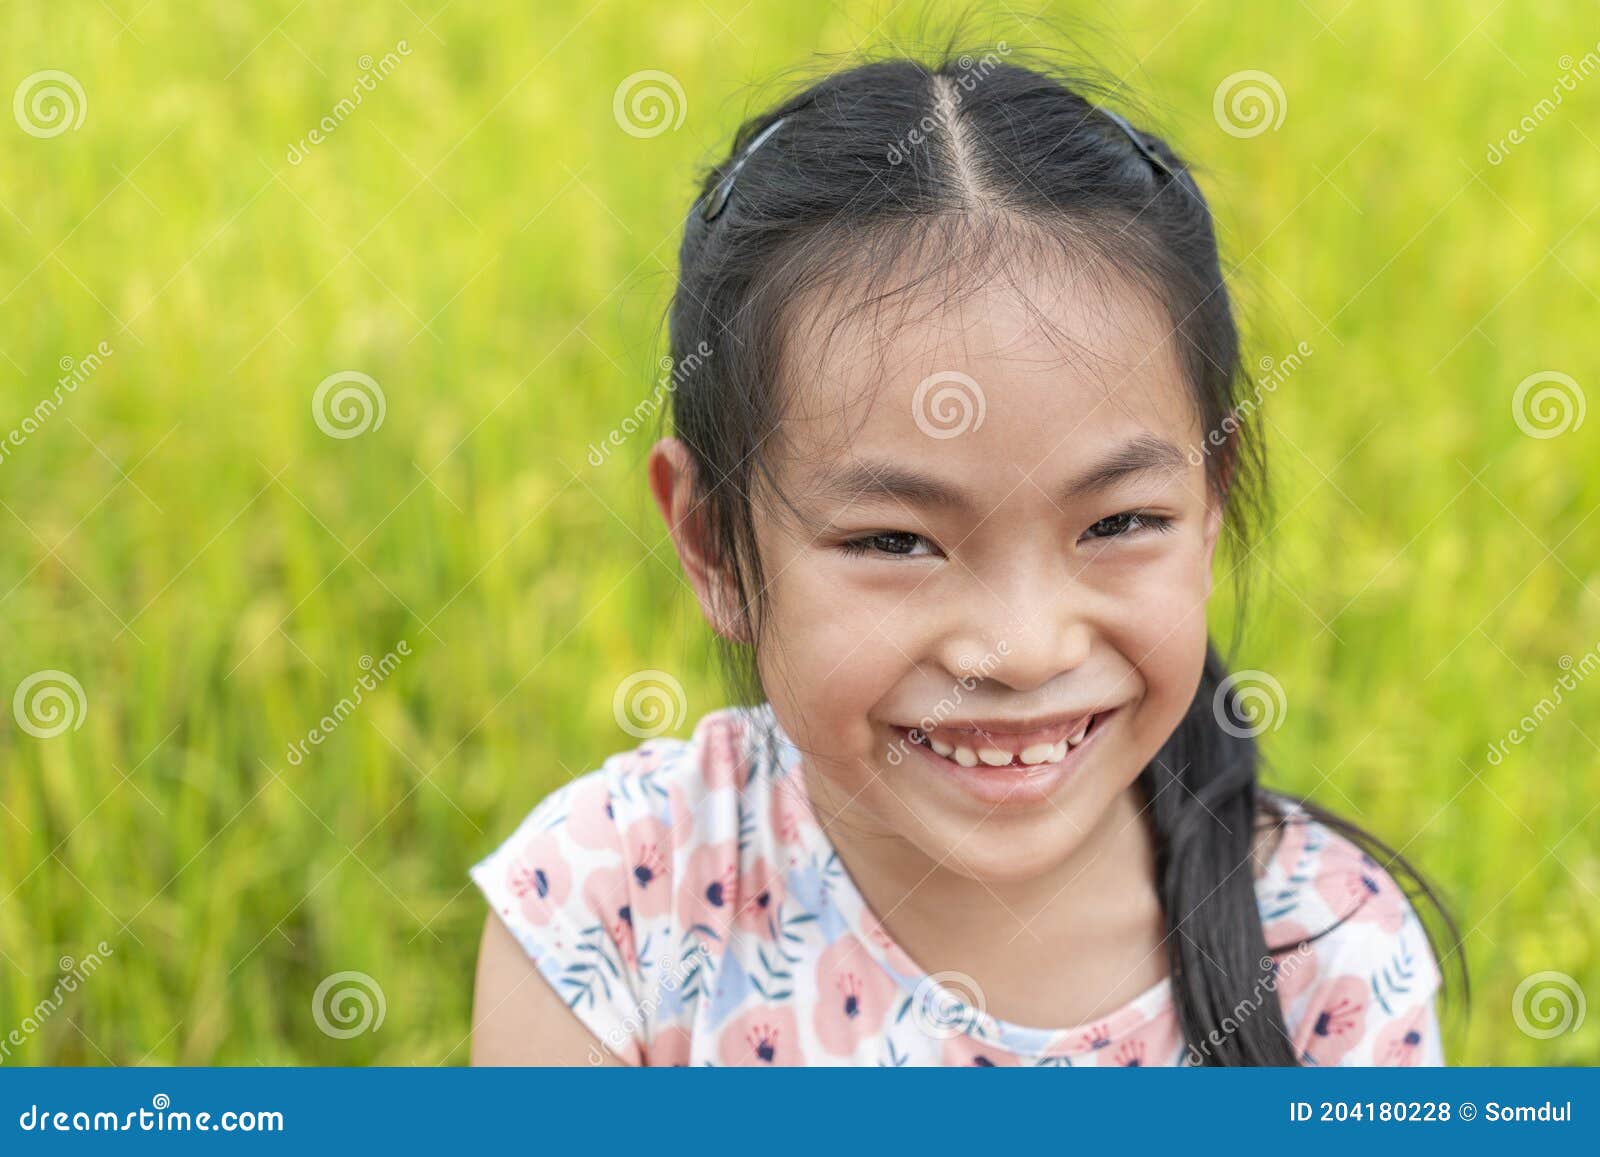 Beautiful Portrait of Asian Child Girl on Vacation, Cute Face with Big ...